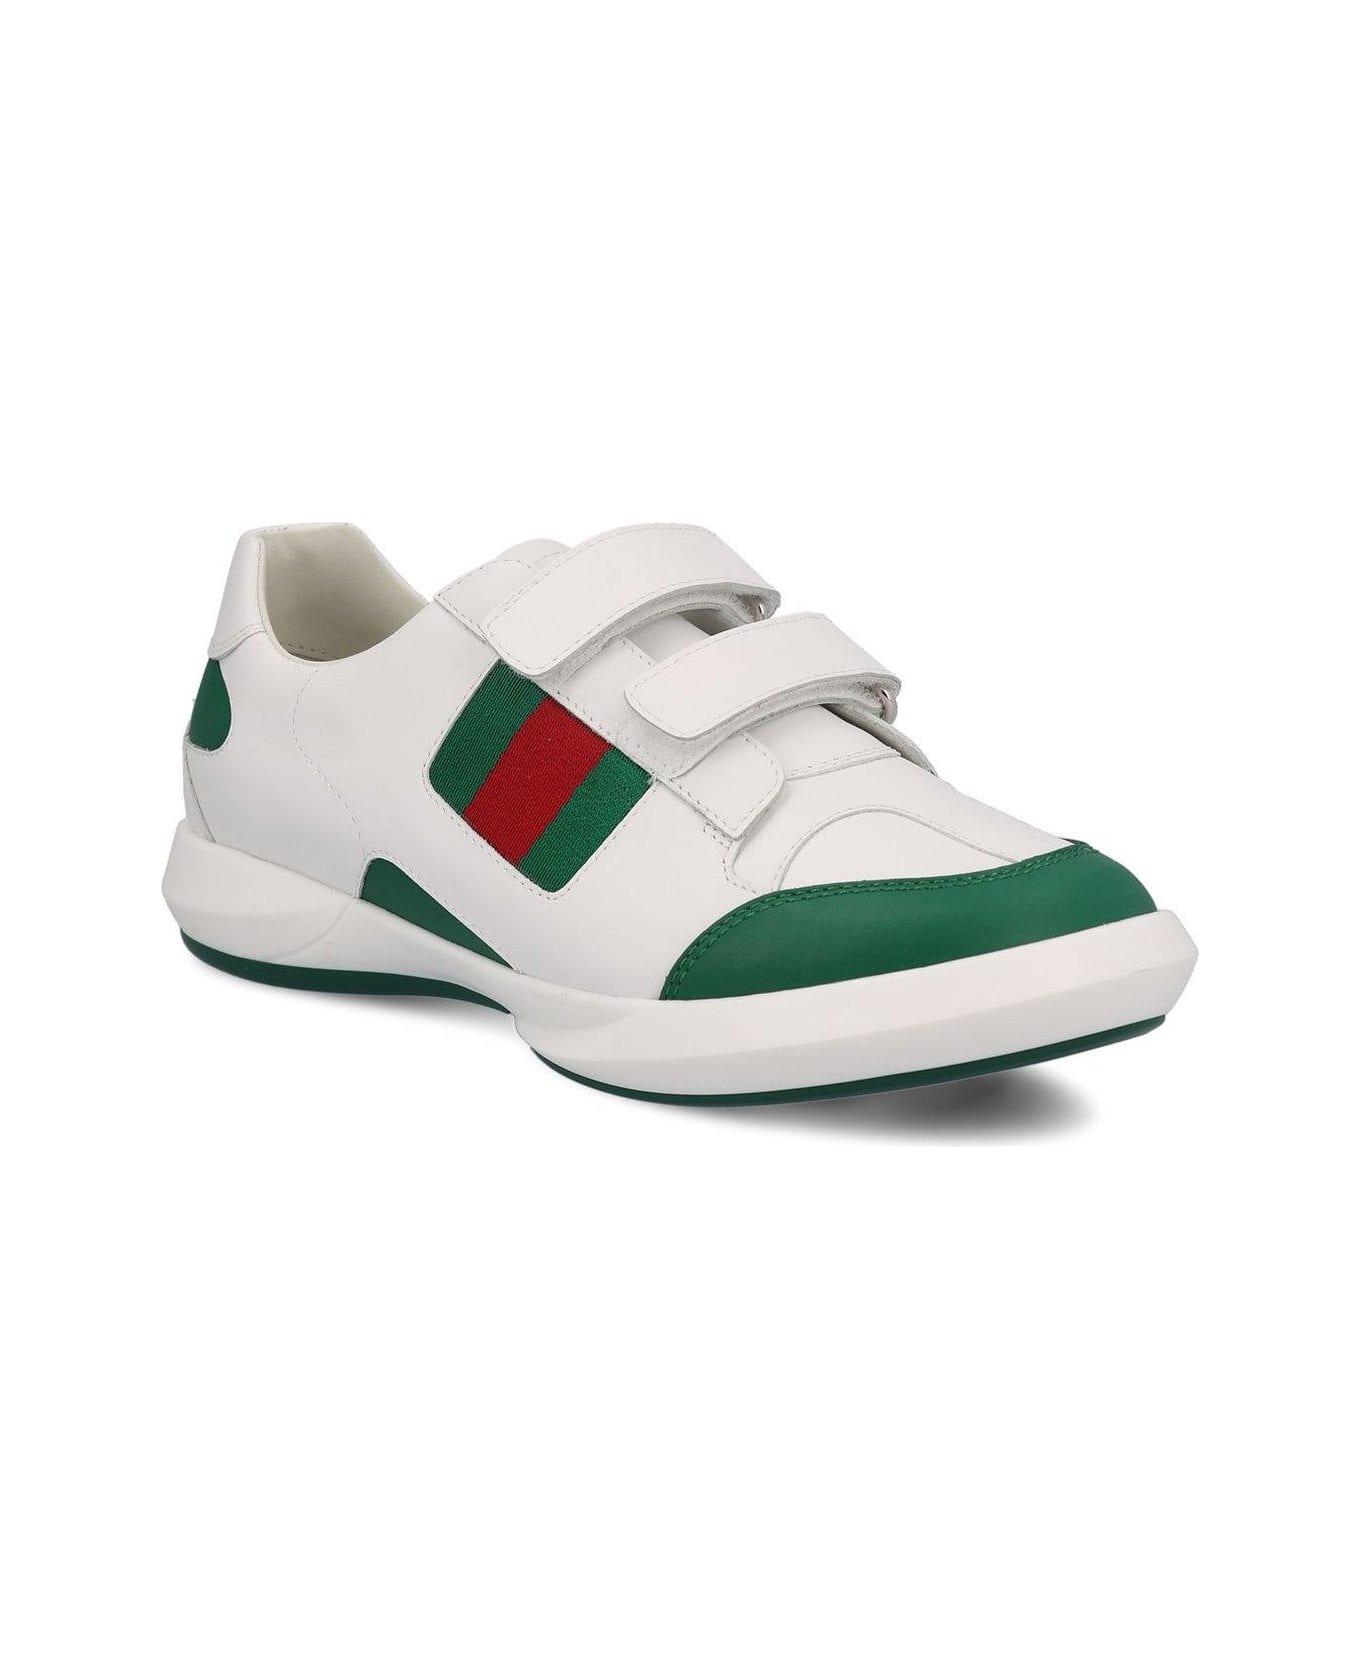 Gucci Logo Printed Round Toe Sneakers